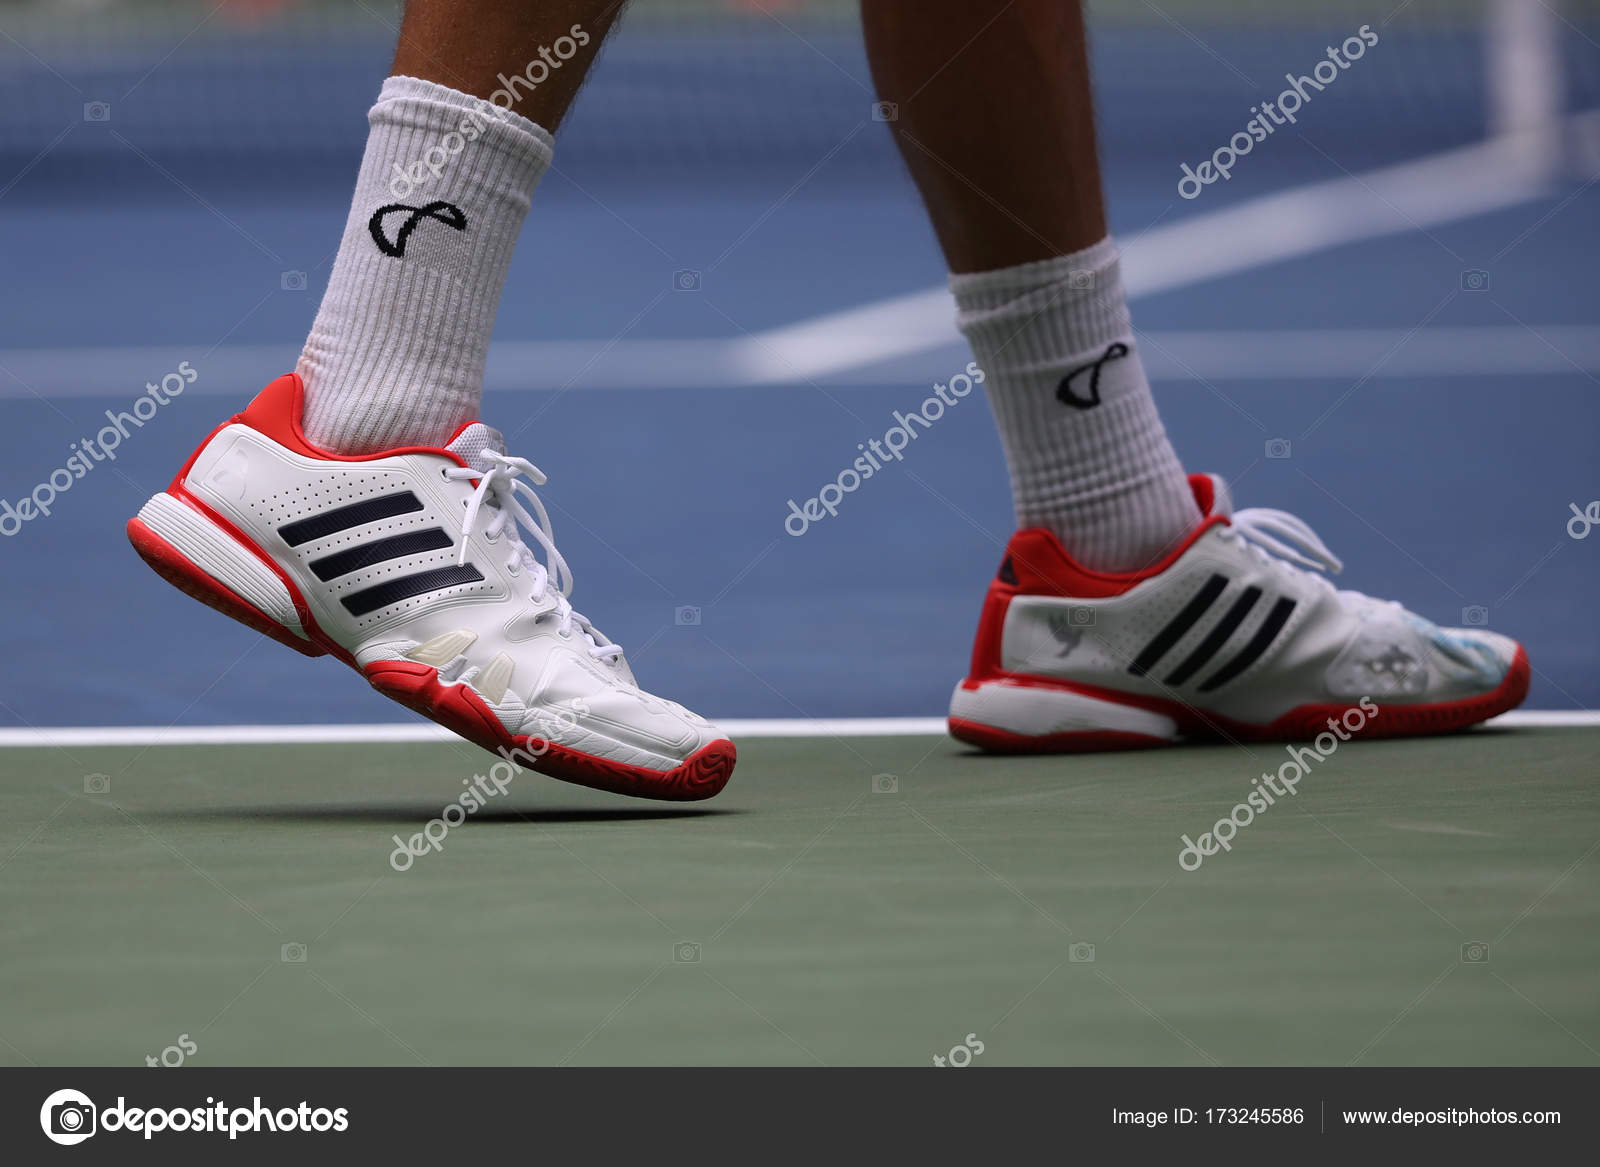 Professional tennis player Tennys Sandgren of USA wears Adidas special  edition Babolat 7 Novak Djokovic tennis shoes during his 2017 US Open first  round match – Stock Editorial Photo © zhukovsky #173245586